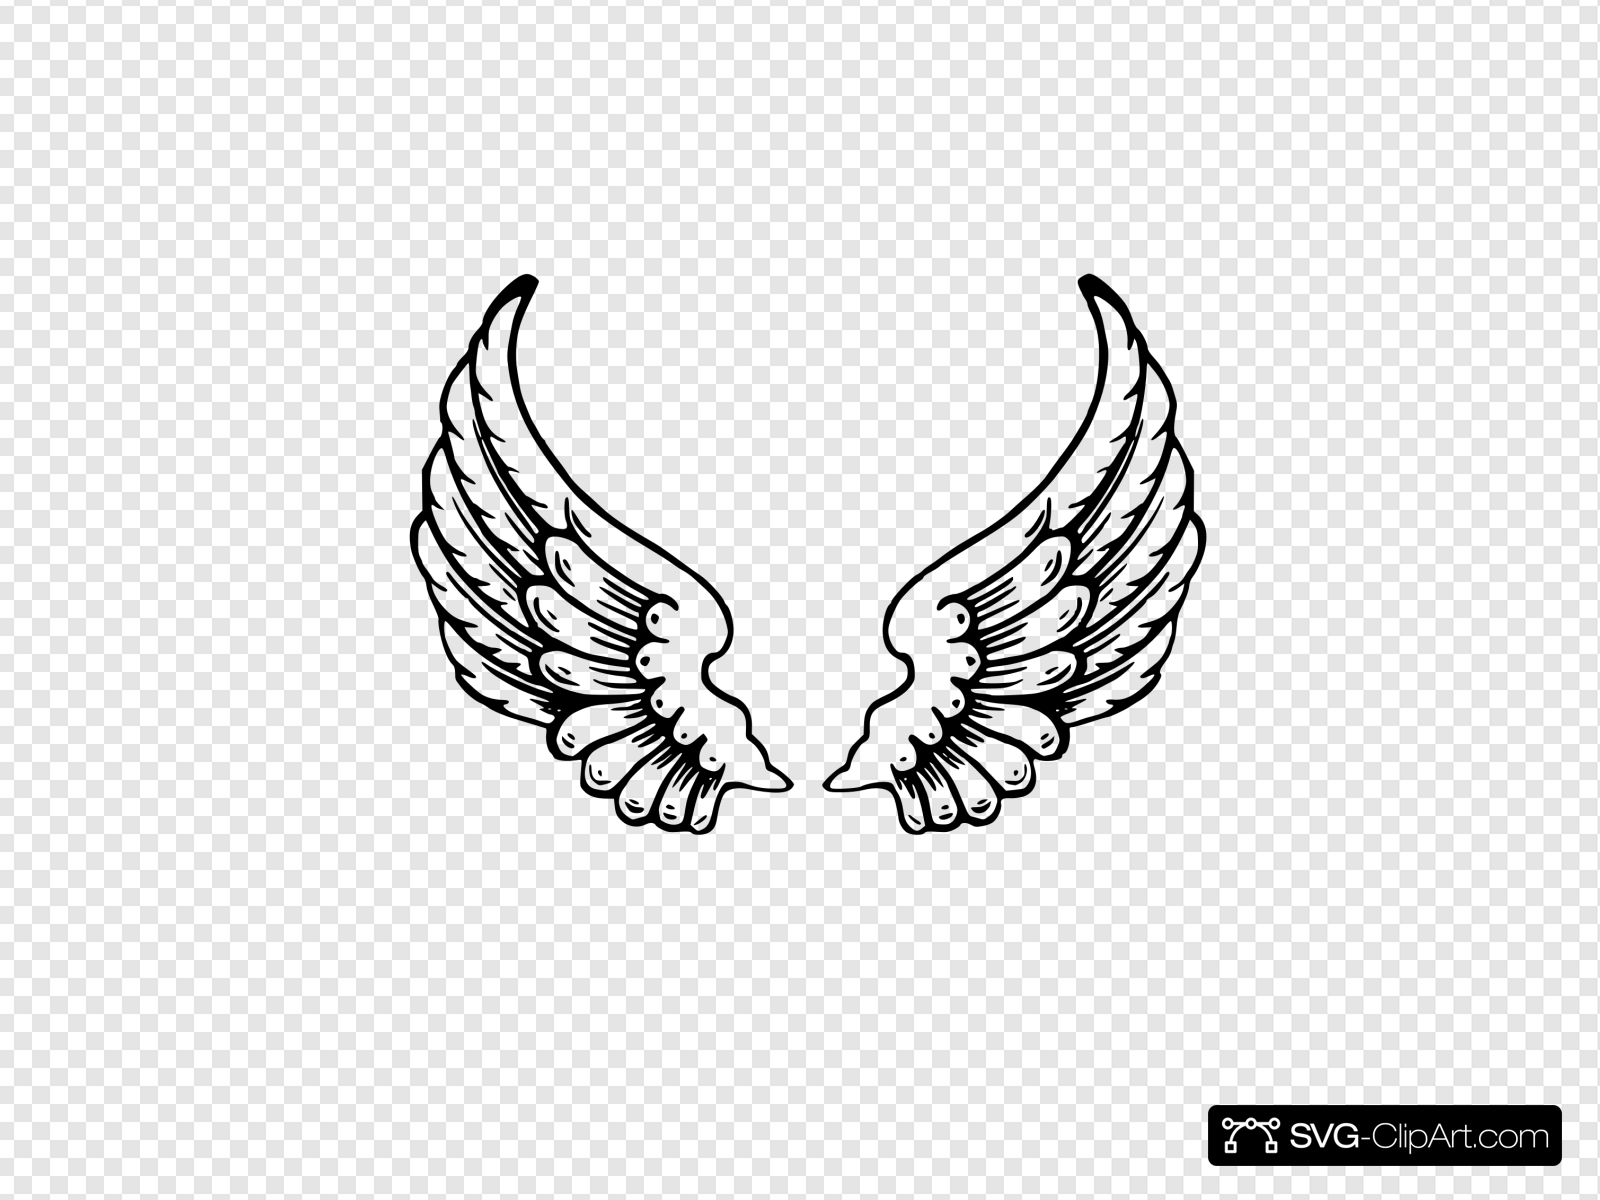 Angel Wings Clip art, Icon and SVG